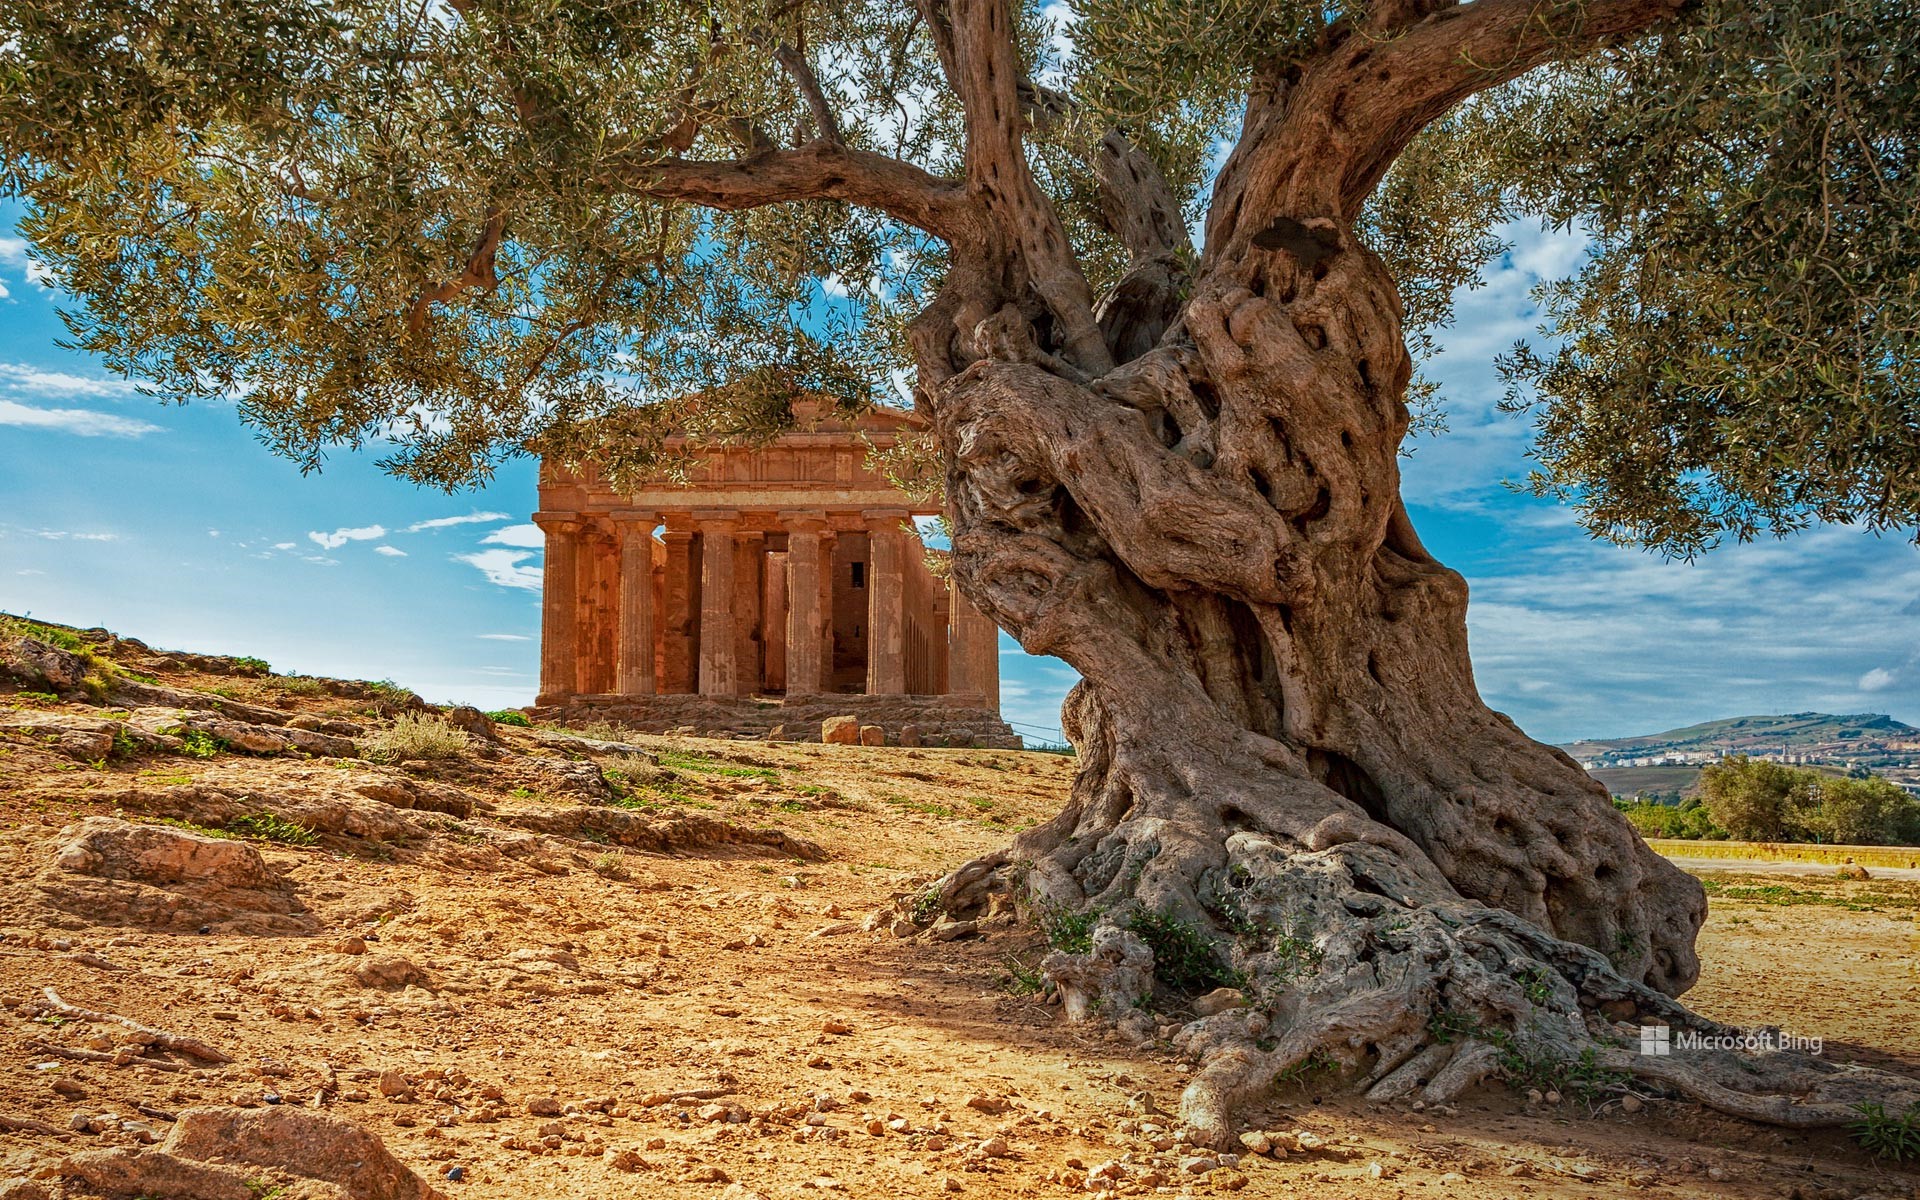 An olive tree in front of the Temple of Concordia on the island of Sicily, Italy